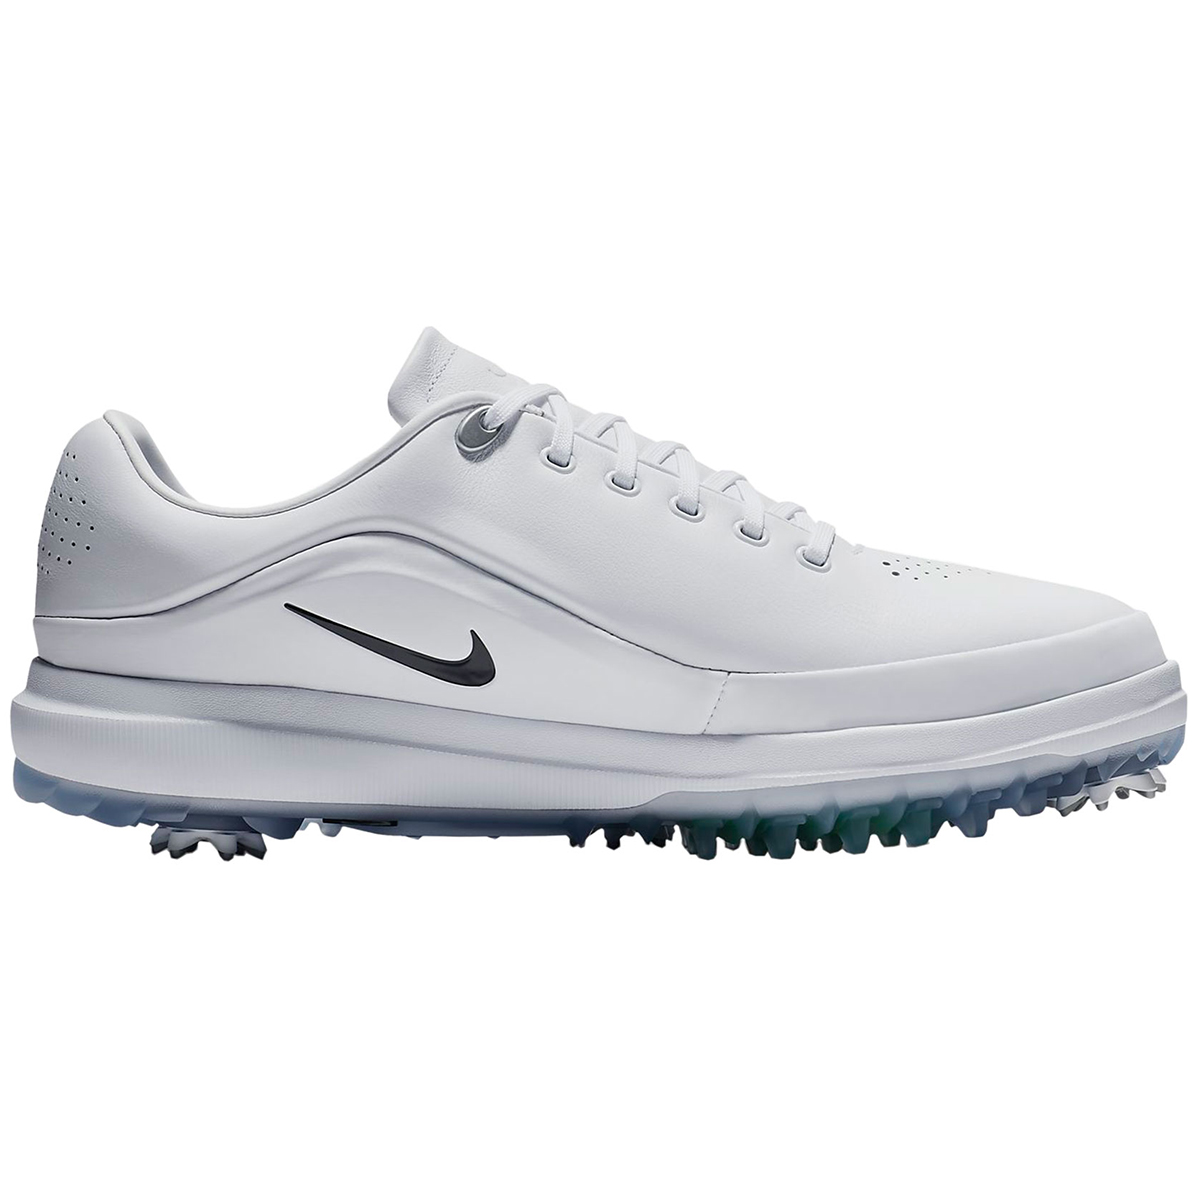 Nike Golf Air Zoom Precision Shoes | Online Golf